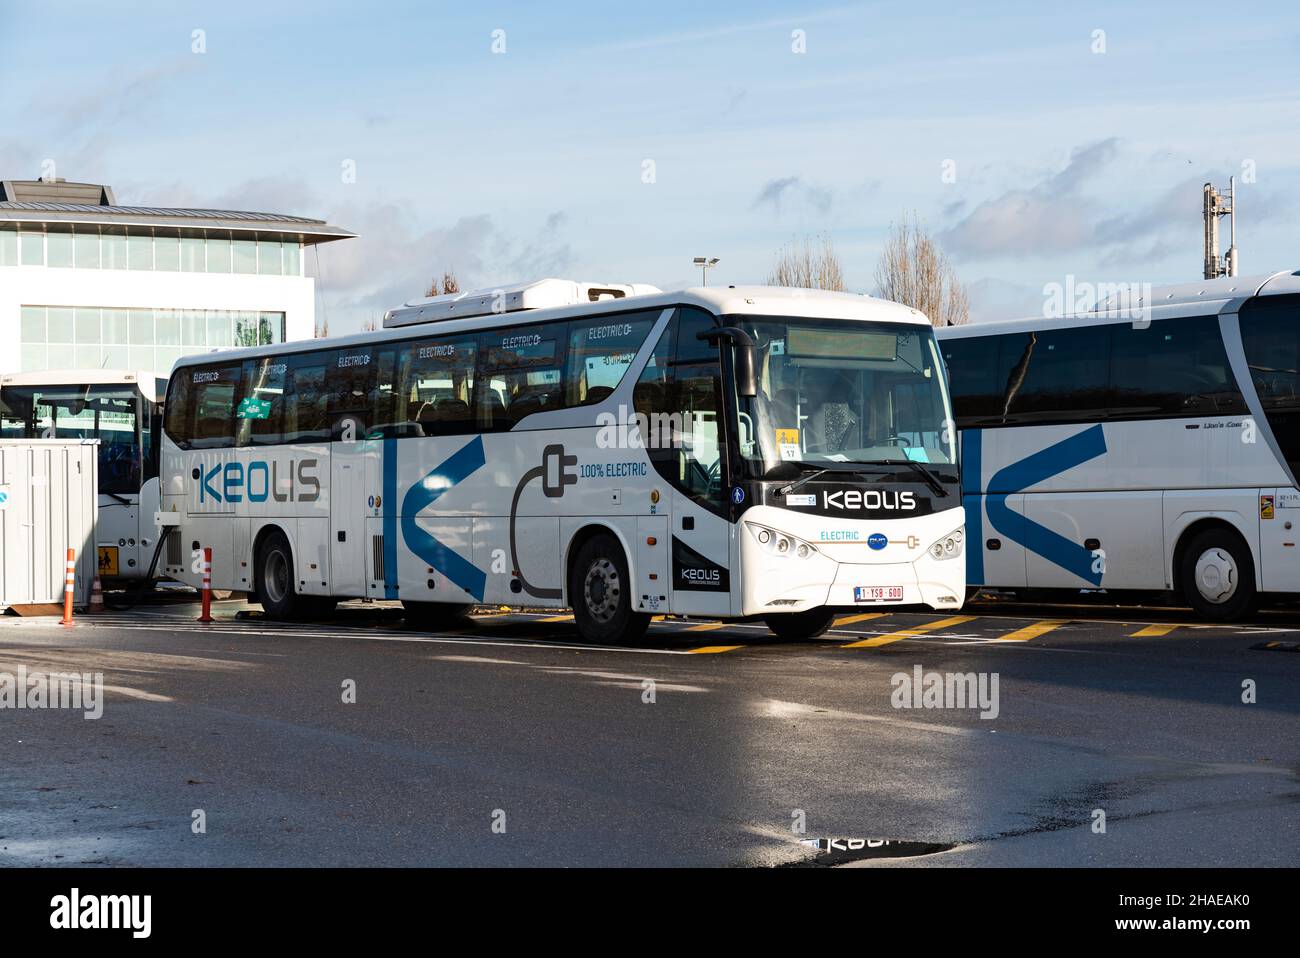 Neder-Over-Heembeek, Brussels, Belgium - 12 11 2021: Keolis headquarters in the bus and transport industry Stock Photo